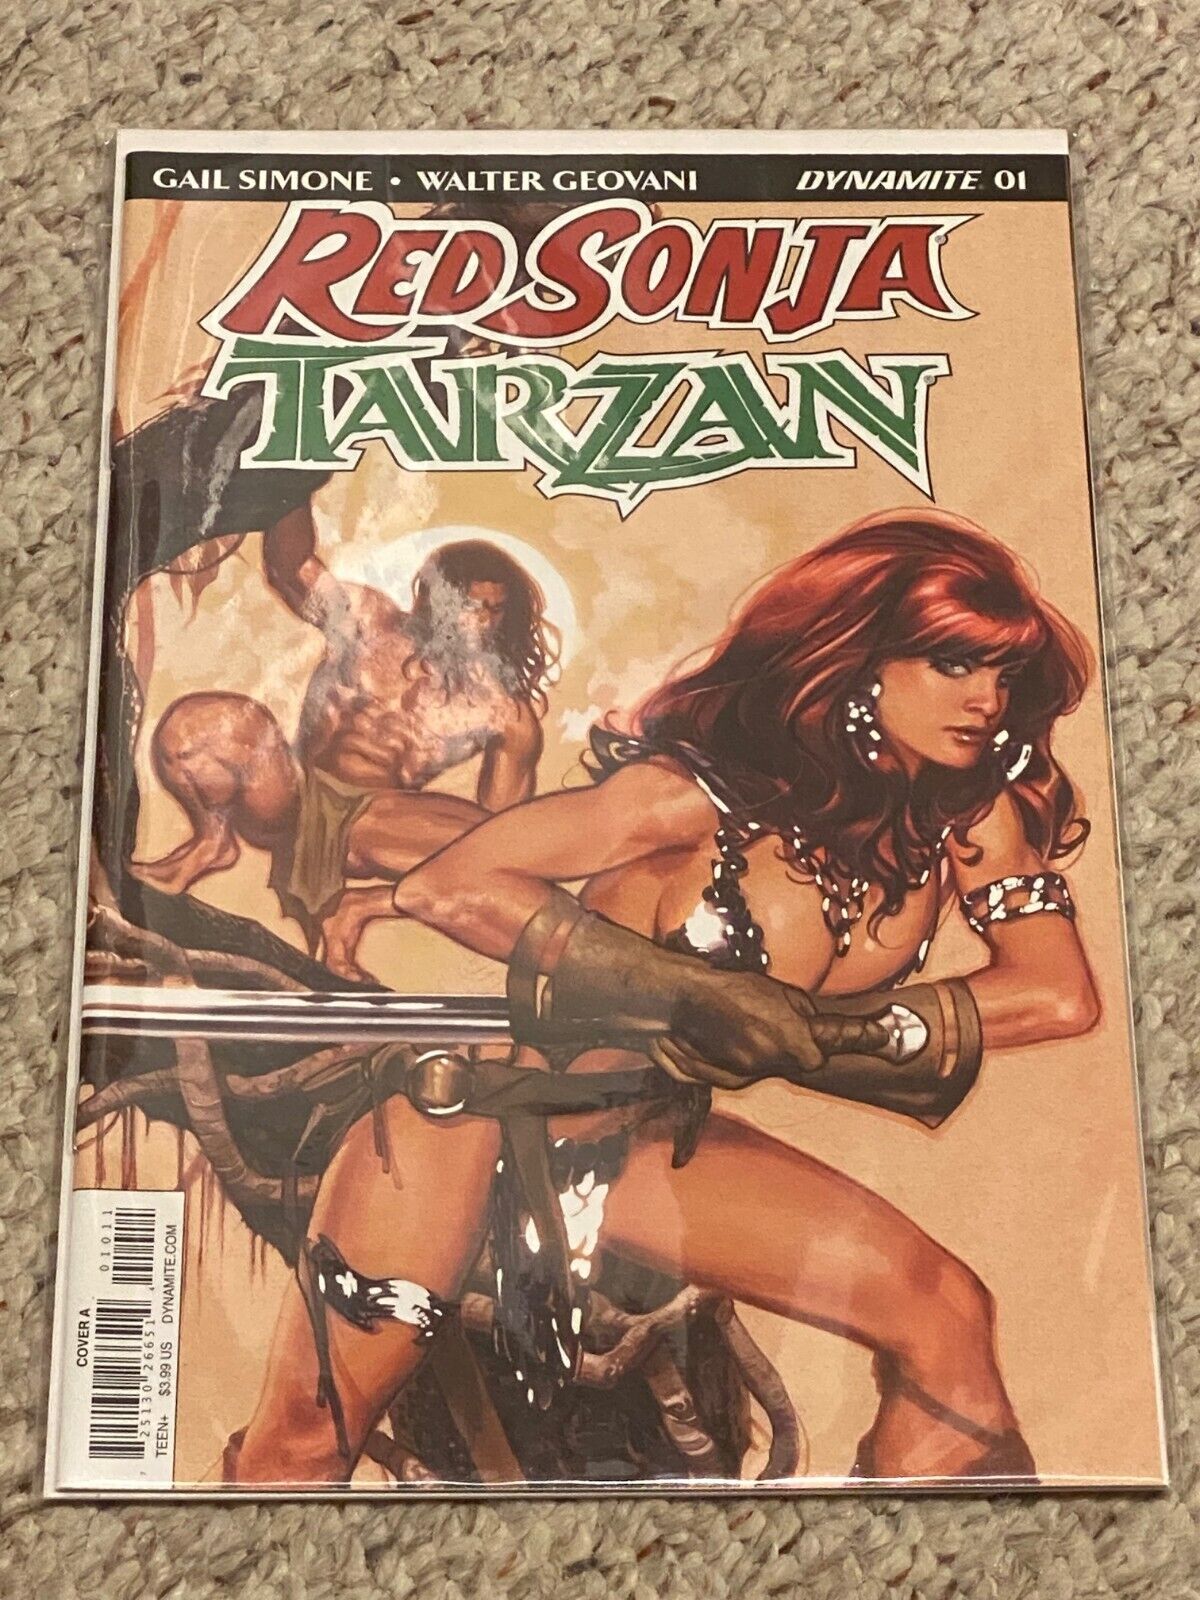 RED SONJA TARZAN ISSUE #1 WITH VARIANT COVER BY ADAM HUGHES